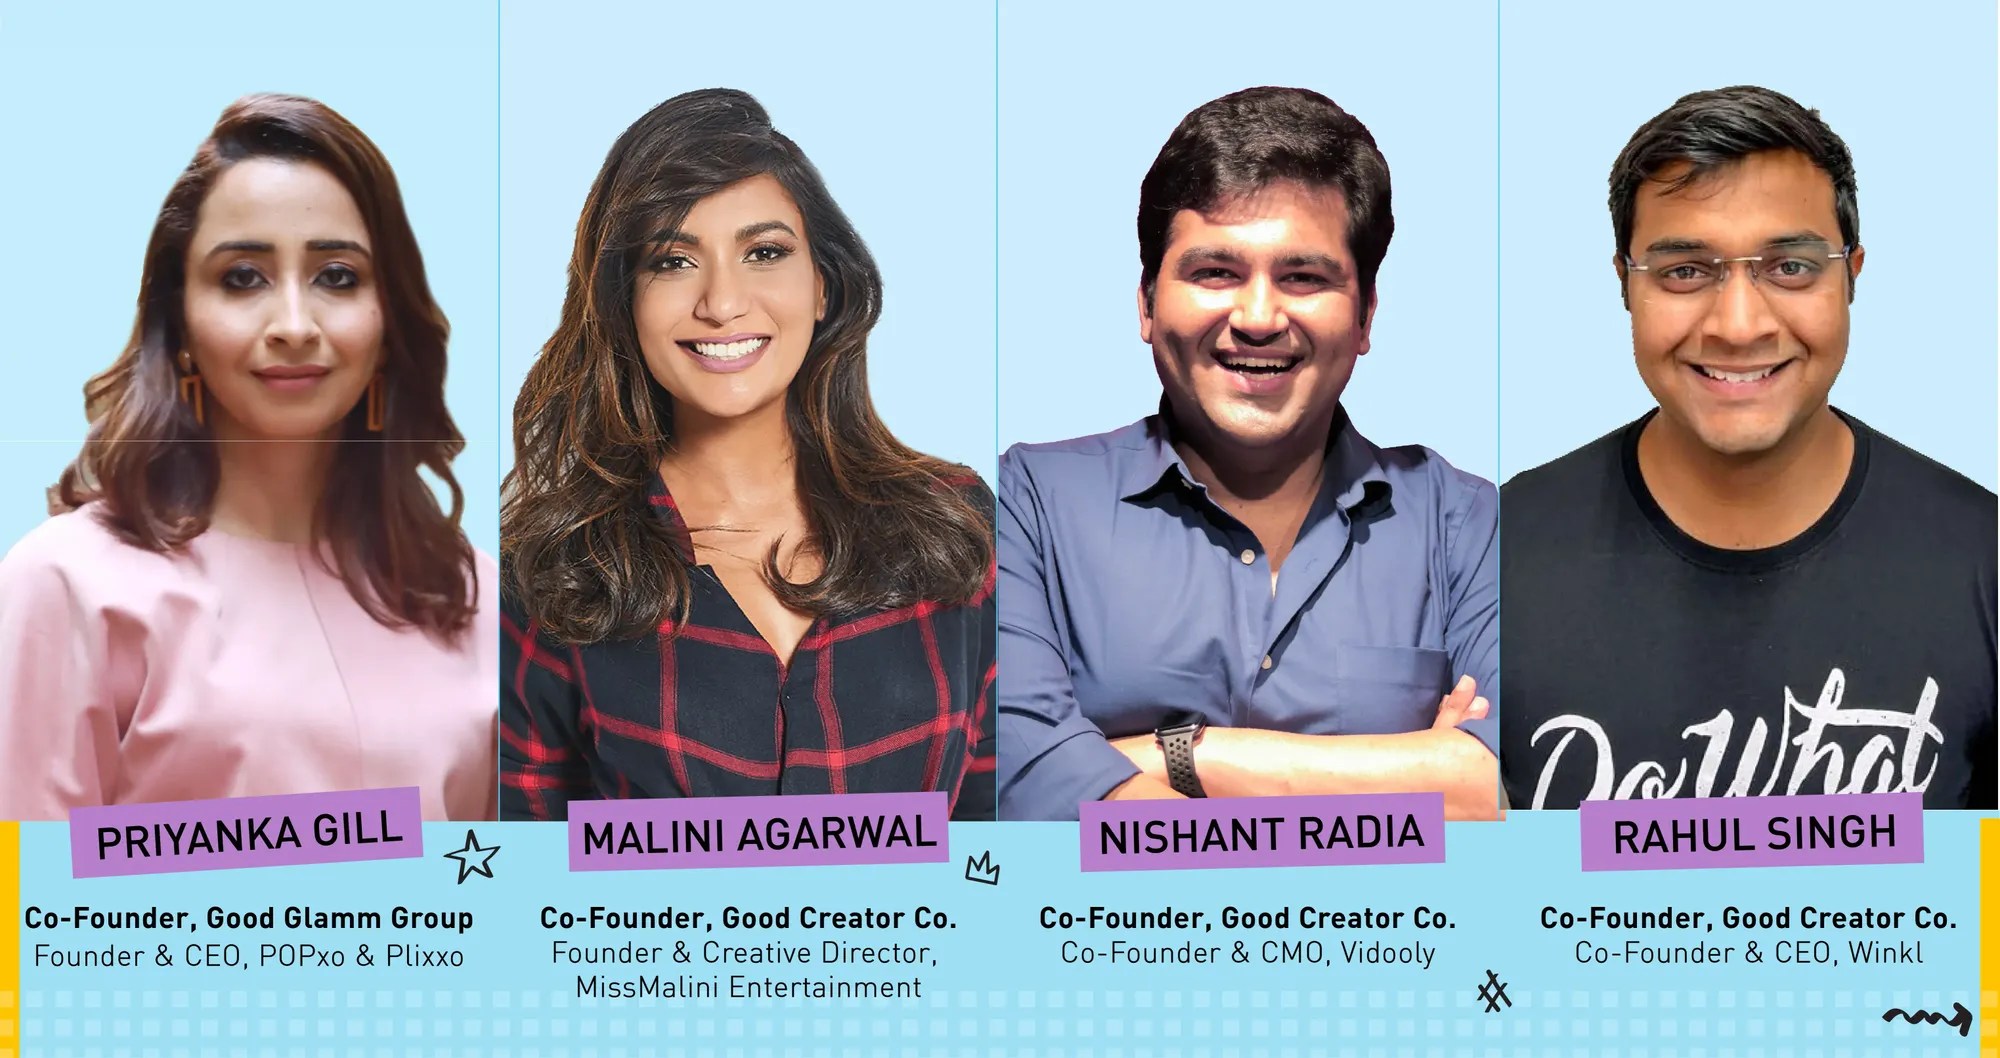 Plixxo, MissMalini, Winkl and Vidooly Spin Off From Good Glamm Group To Form Good Creator Co., India’s Largest Creator Ecosystem